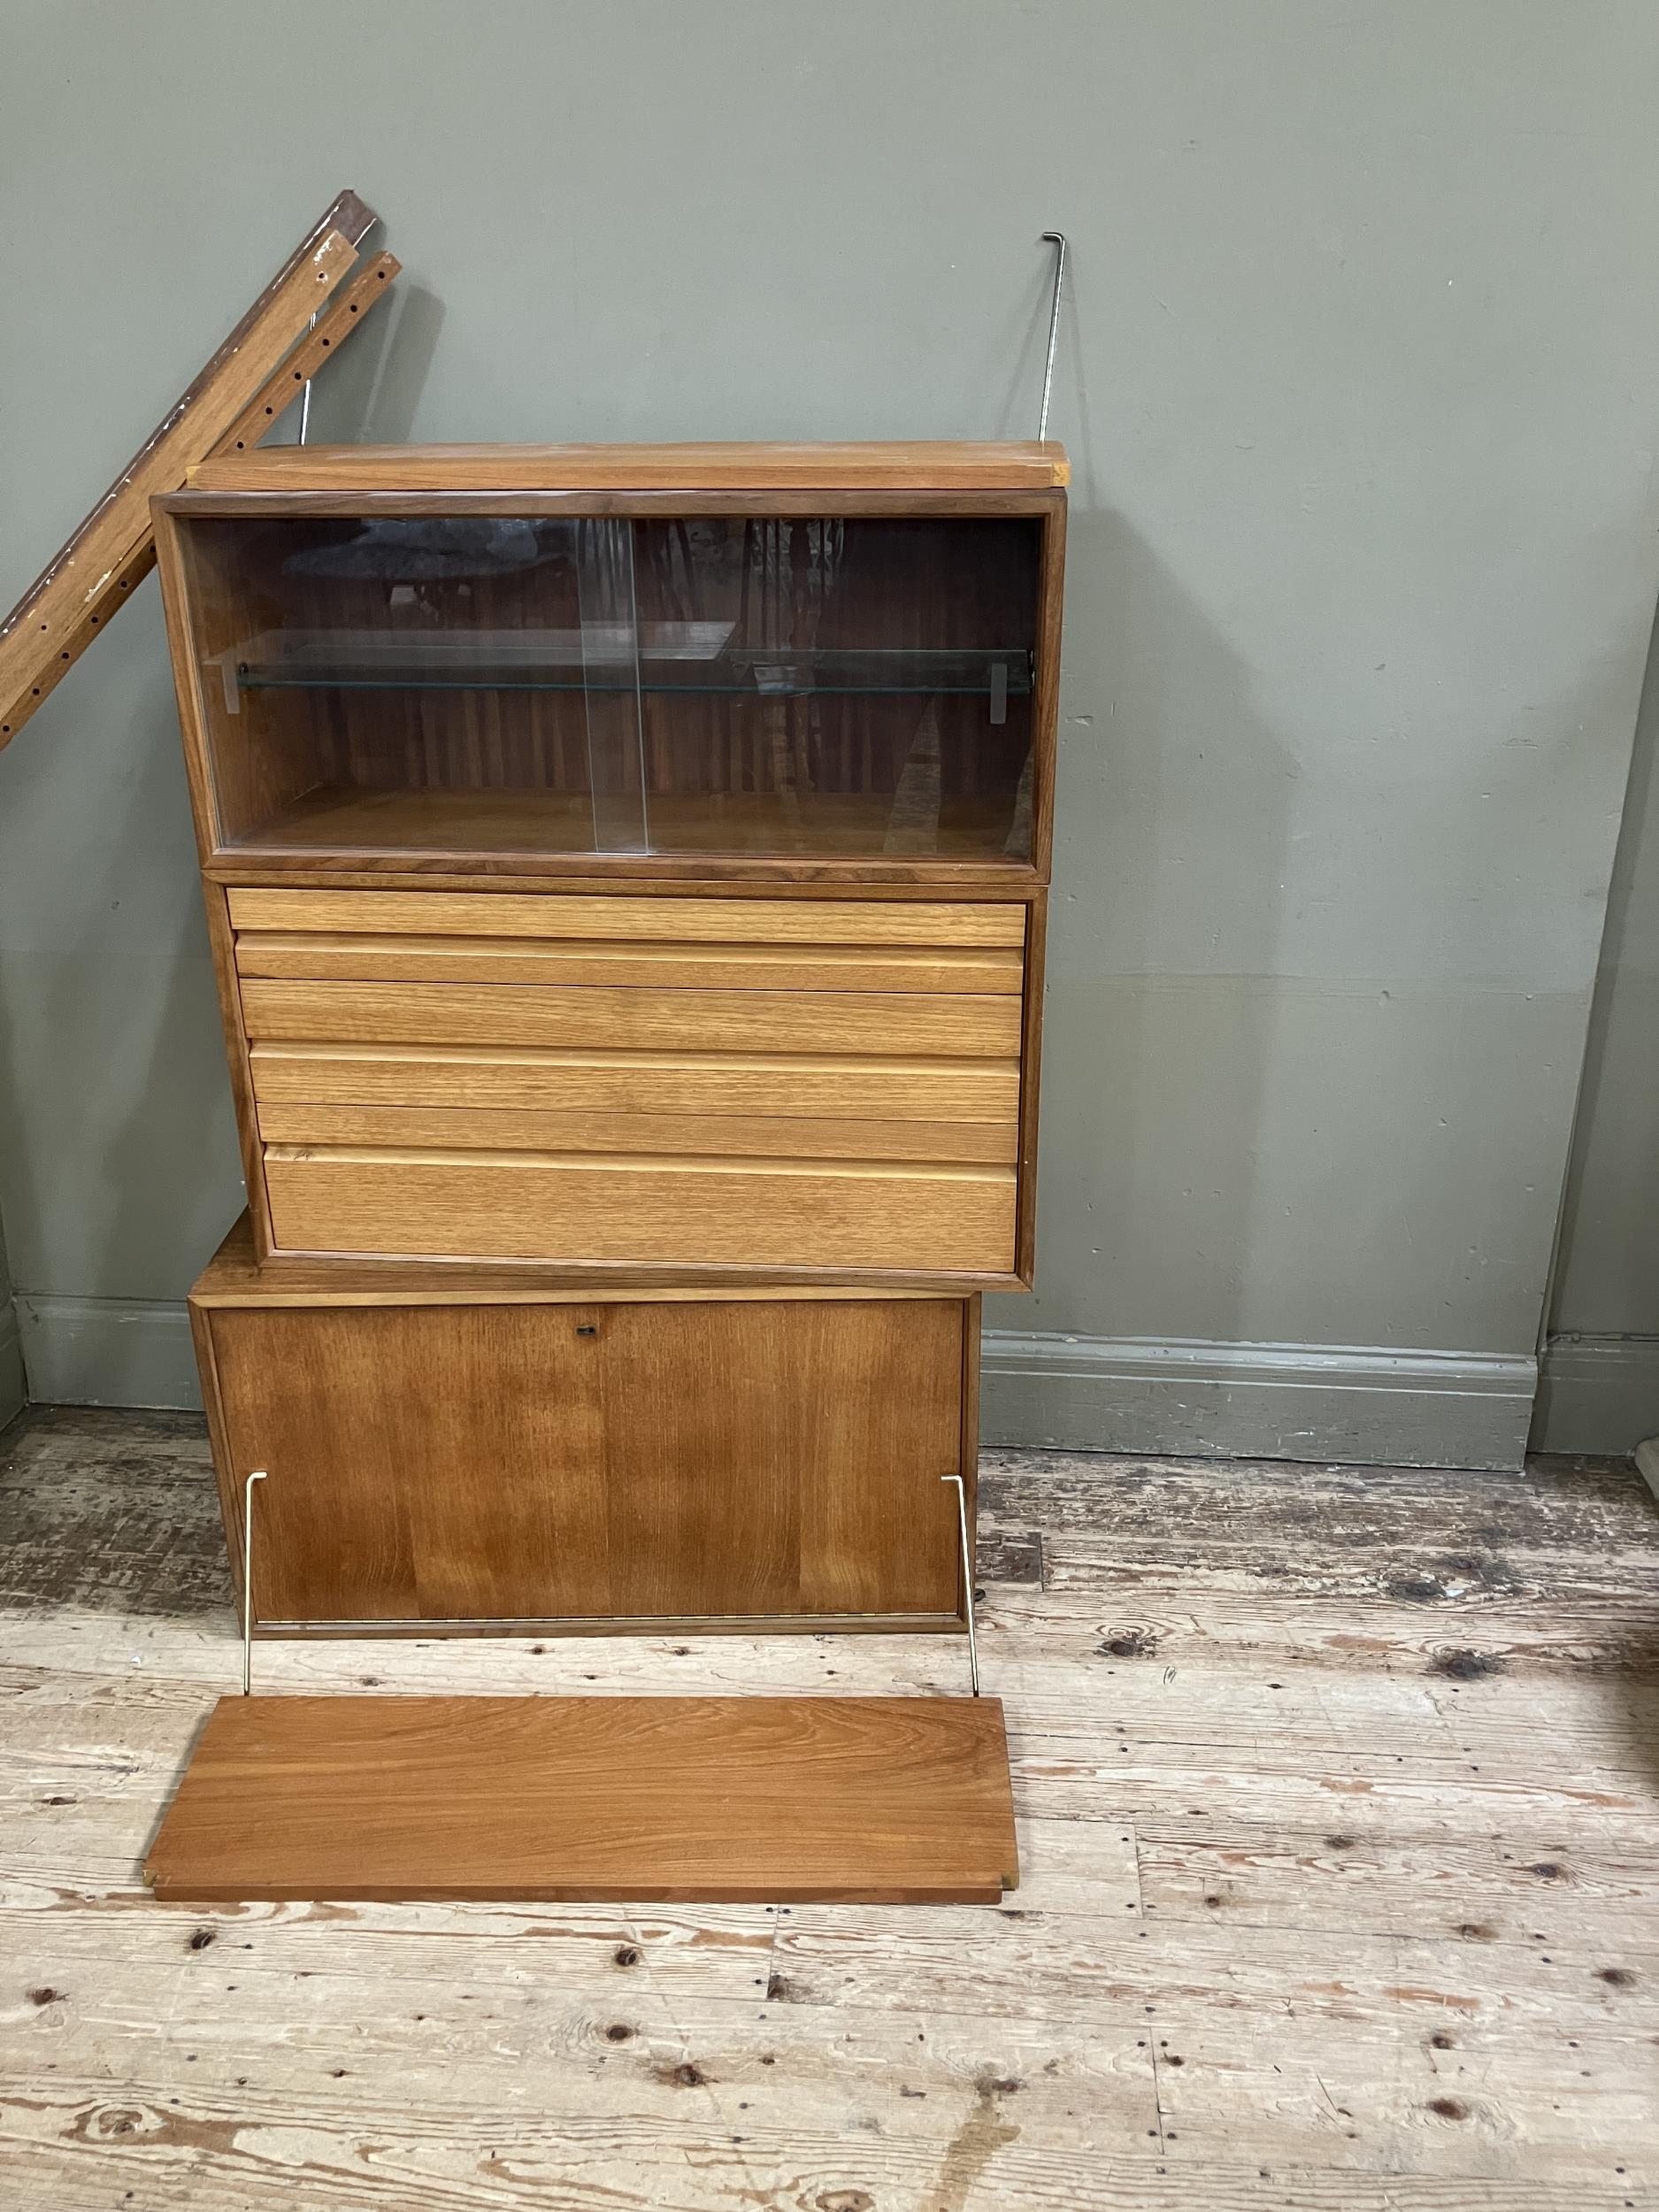 A 1970s style wall hanging unit comprising two shelves, a cupboard unit with sliding glass doors, - Image 2 of 3